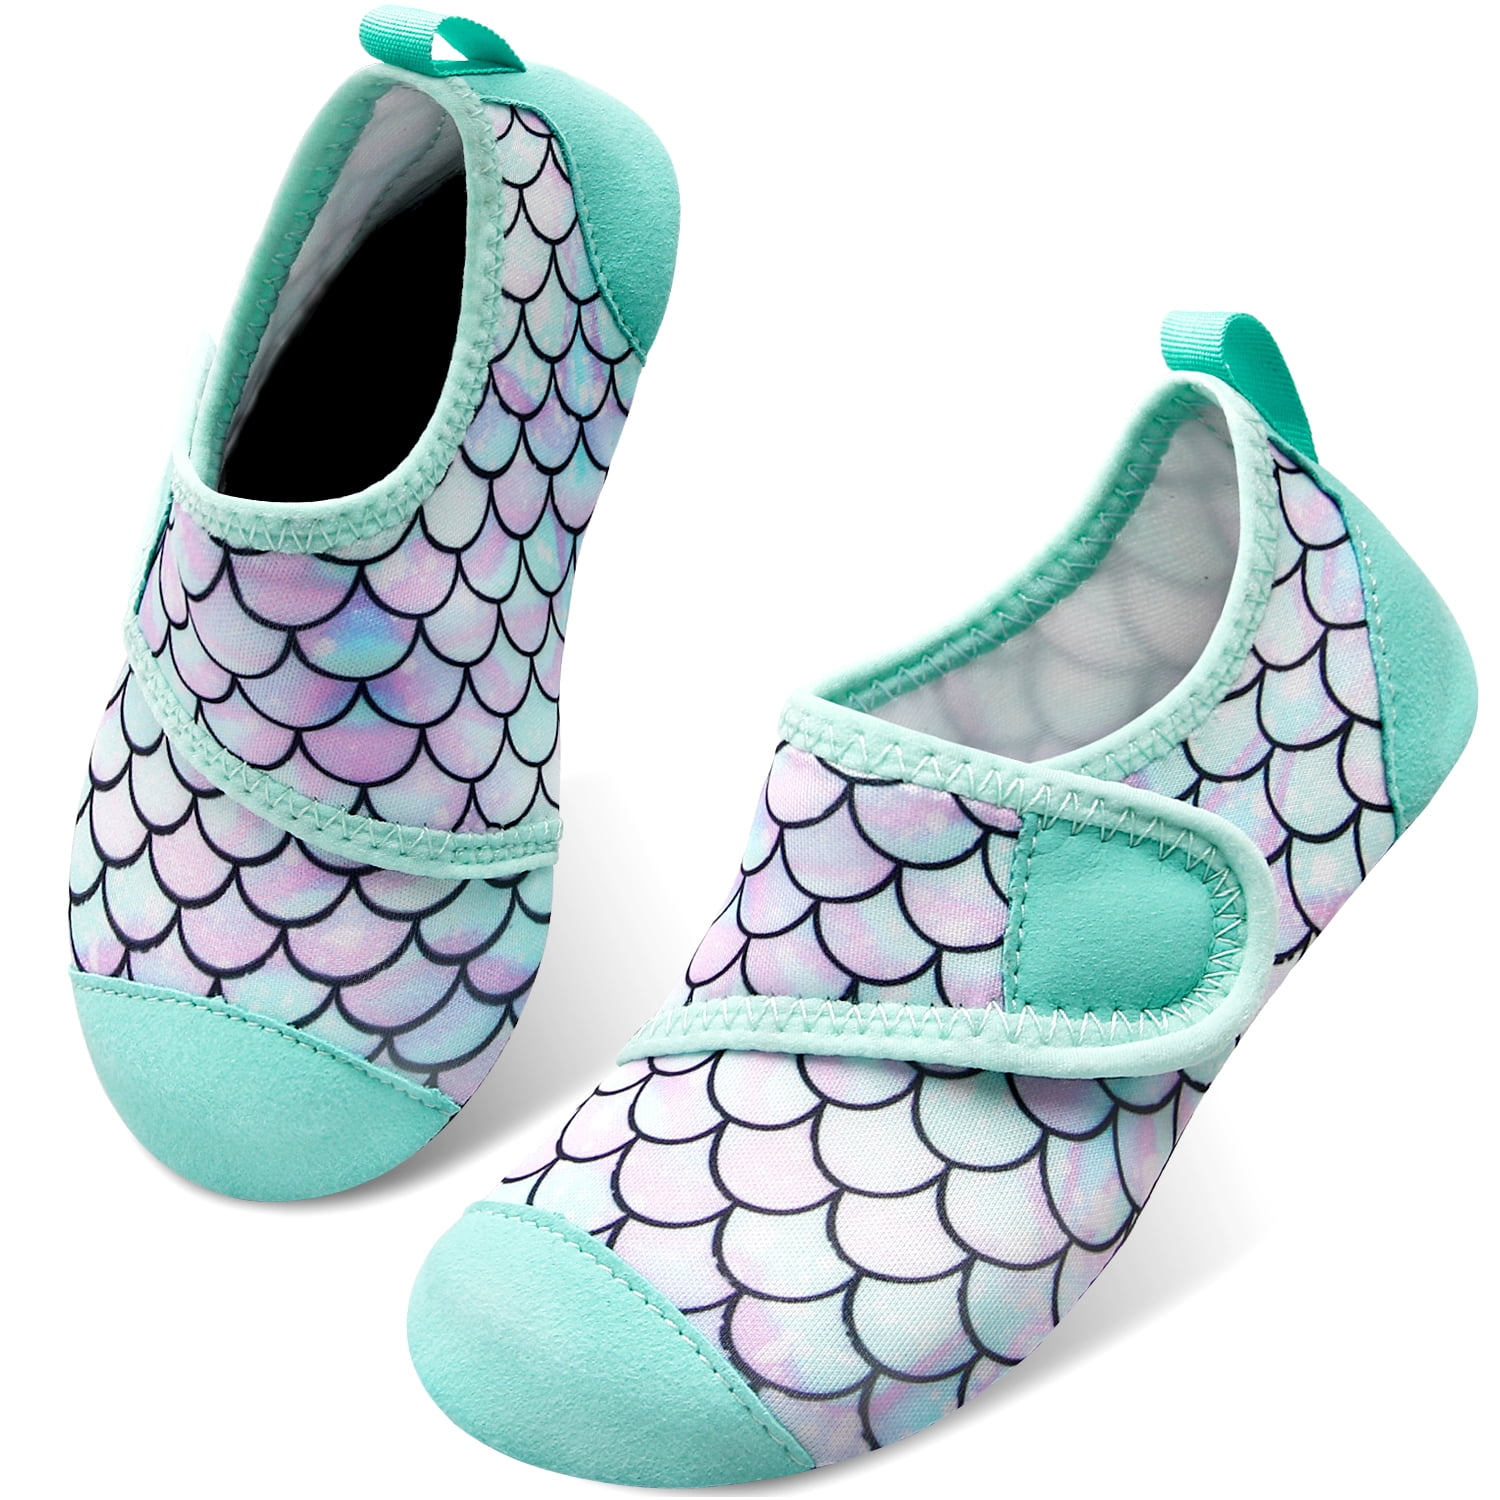 TAGVO Baby Boy Girl Water Shoes Quick Drying Barefoot Skin Aqua Sock Swim Shoes for Beach Pool 